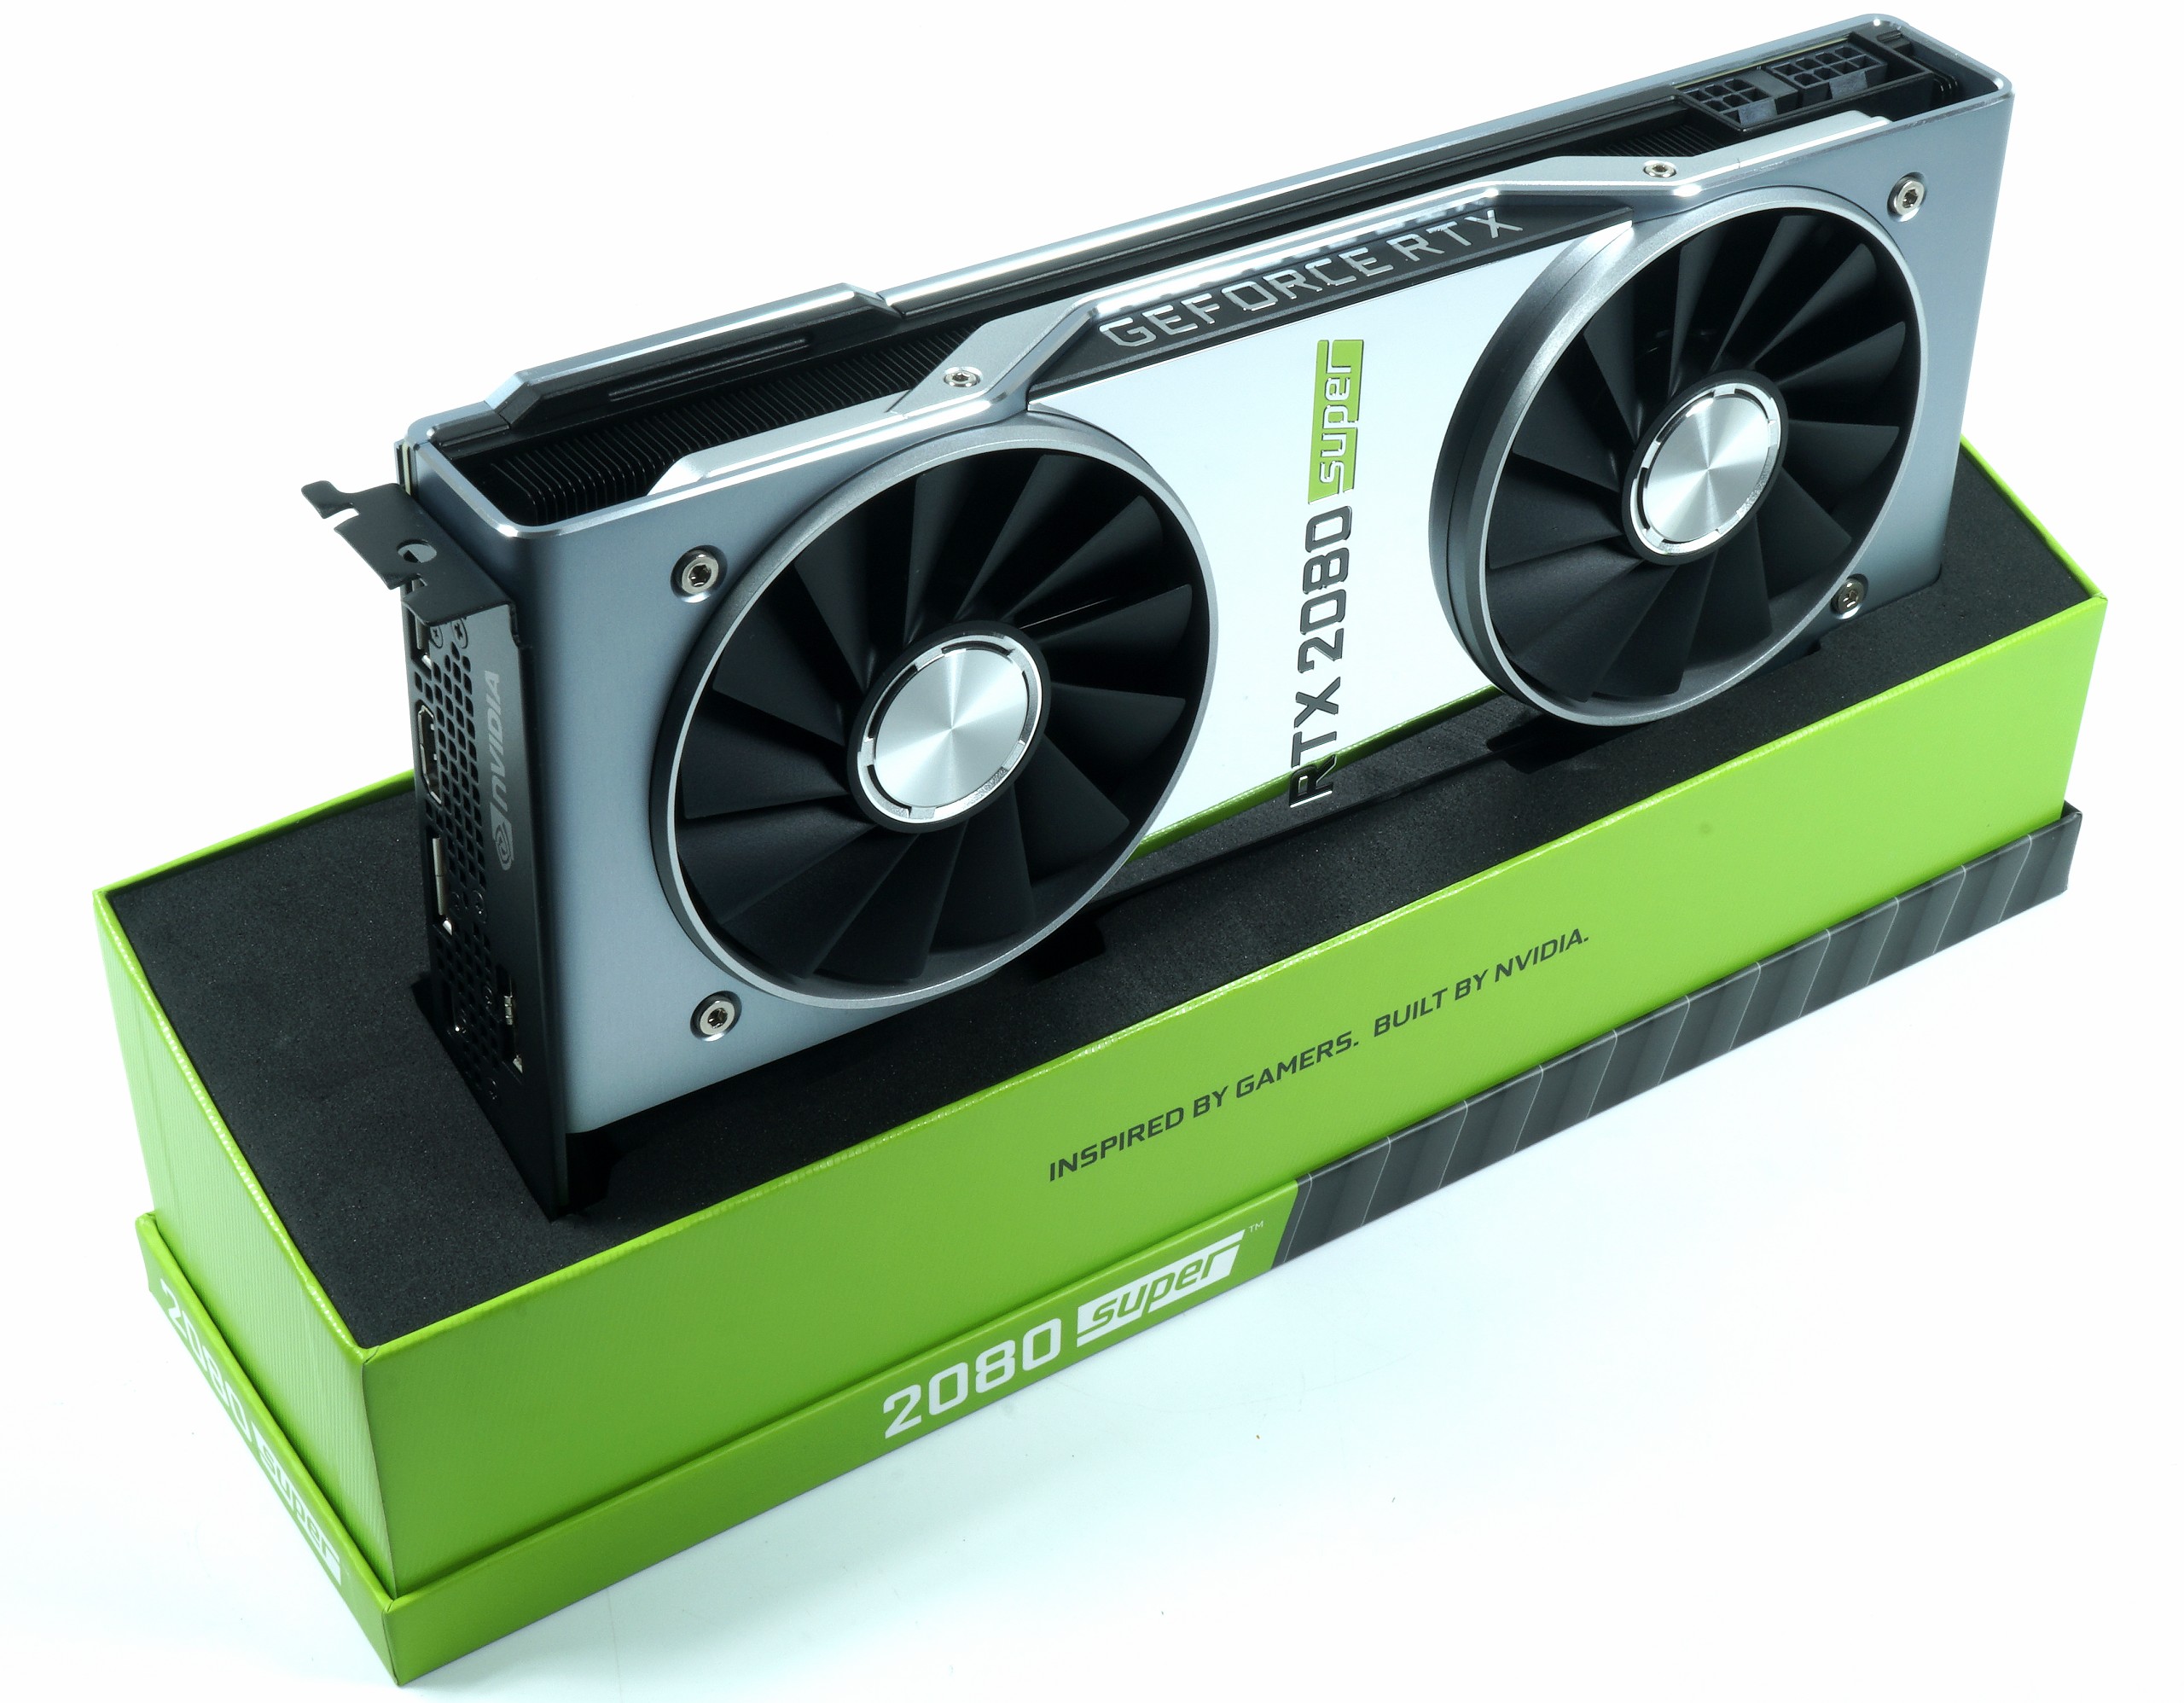 Nvidia GeForce RTX 2080 Super review 